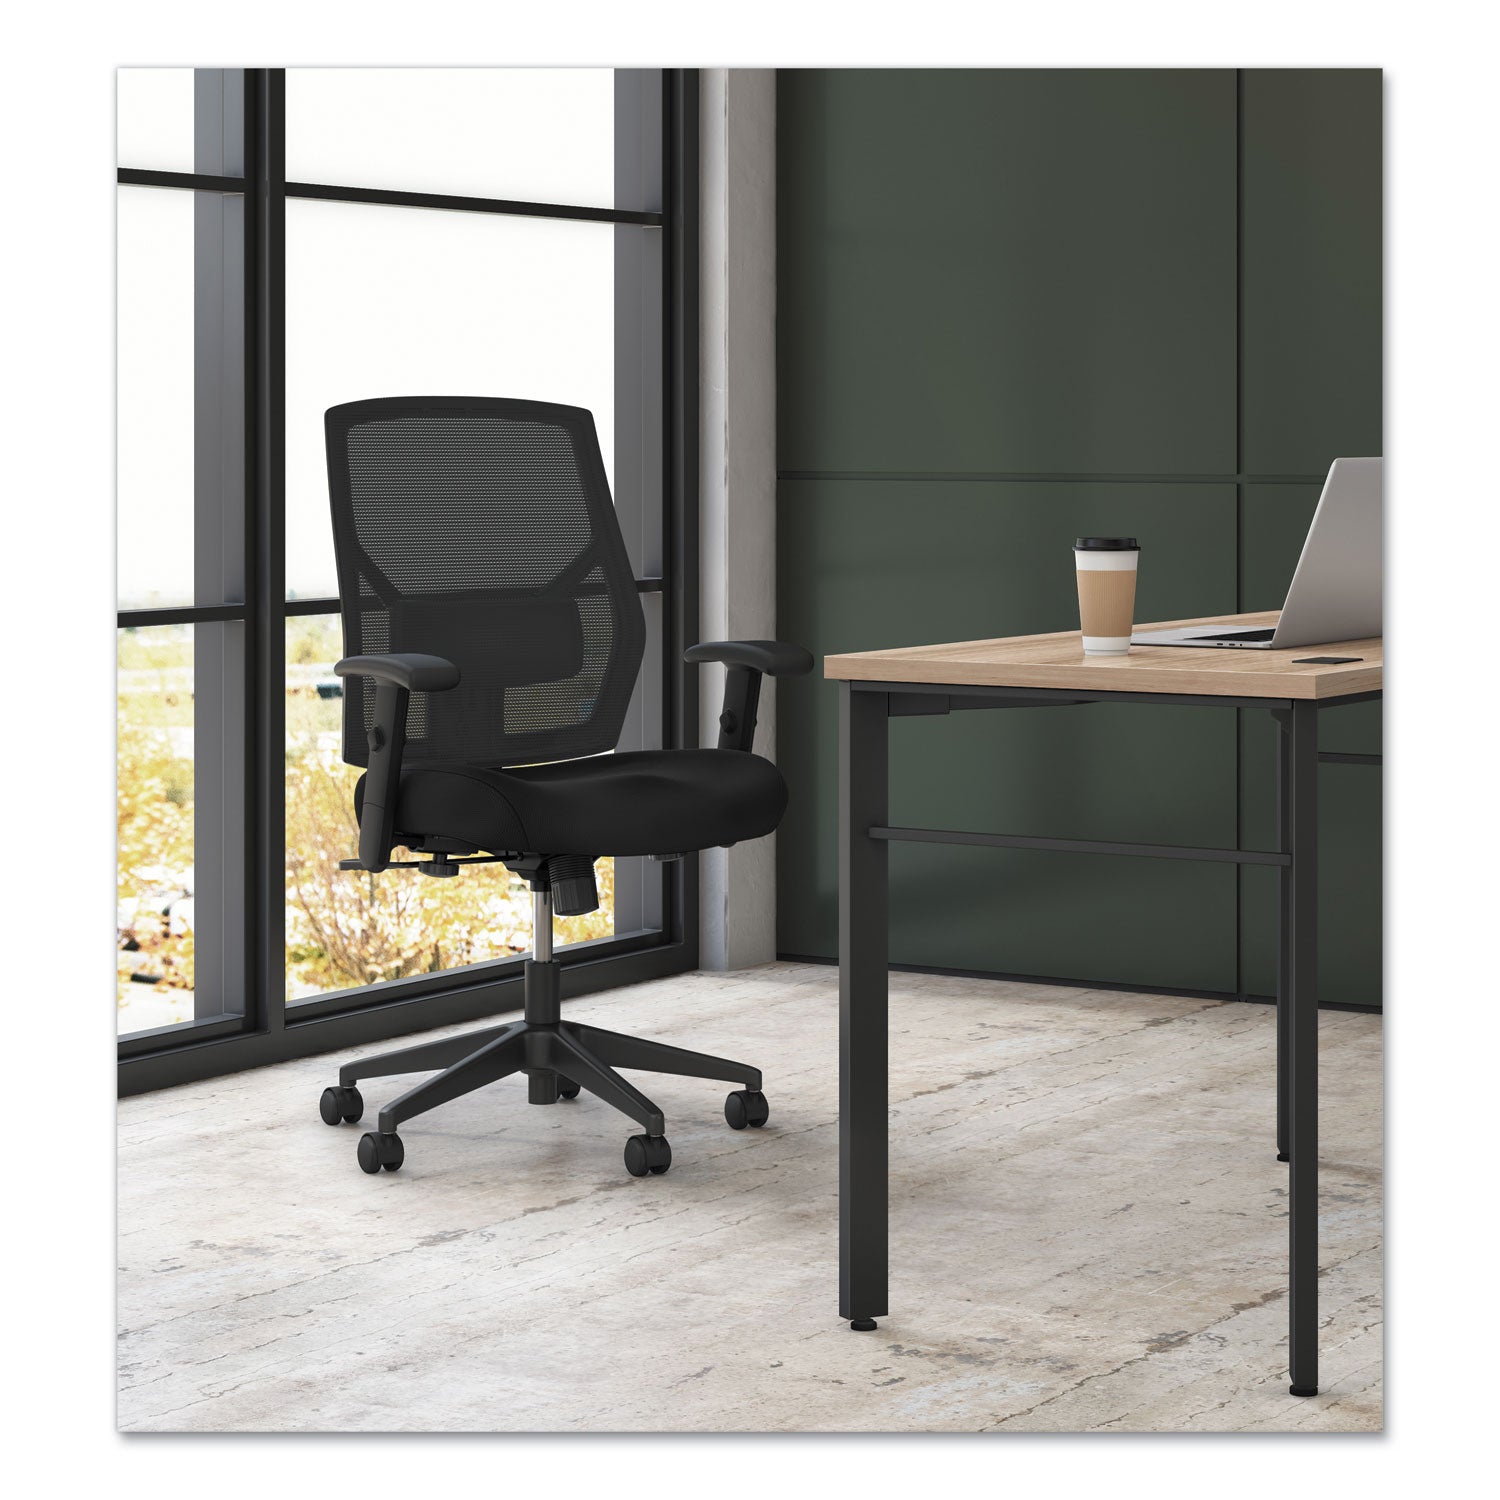 vl581-high-back-task-chair-supports-up-to-250-lb-18-to-22-seat-height-black_bsxvl581es10t - 8